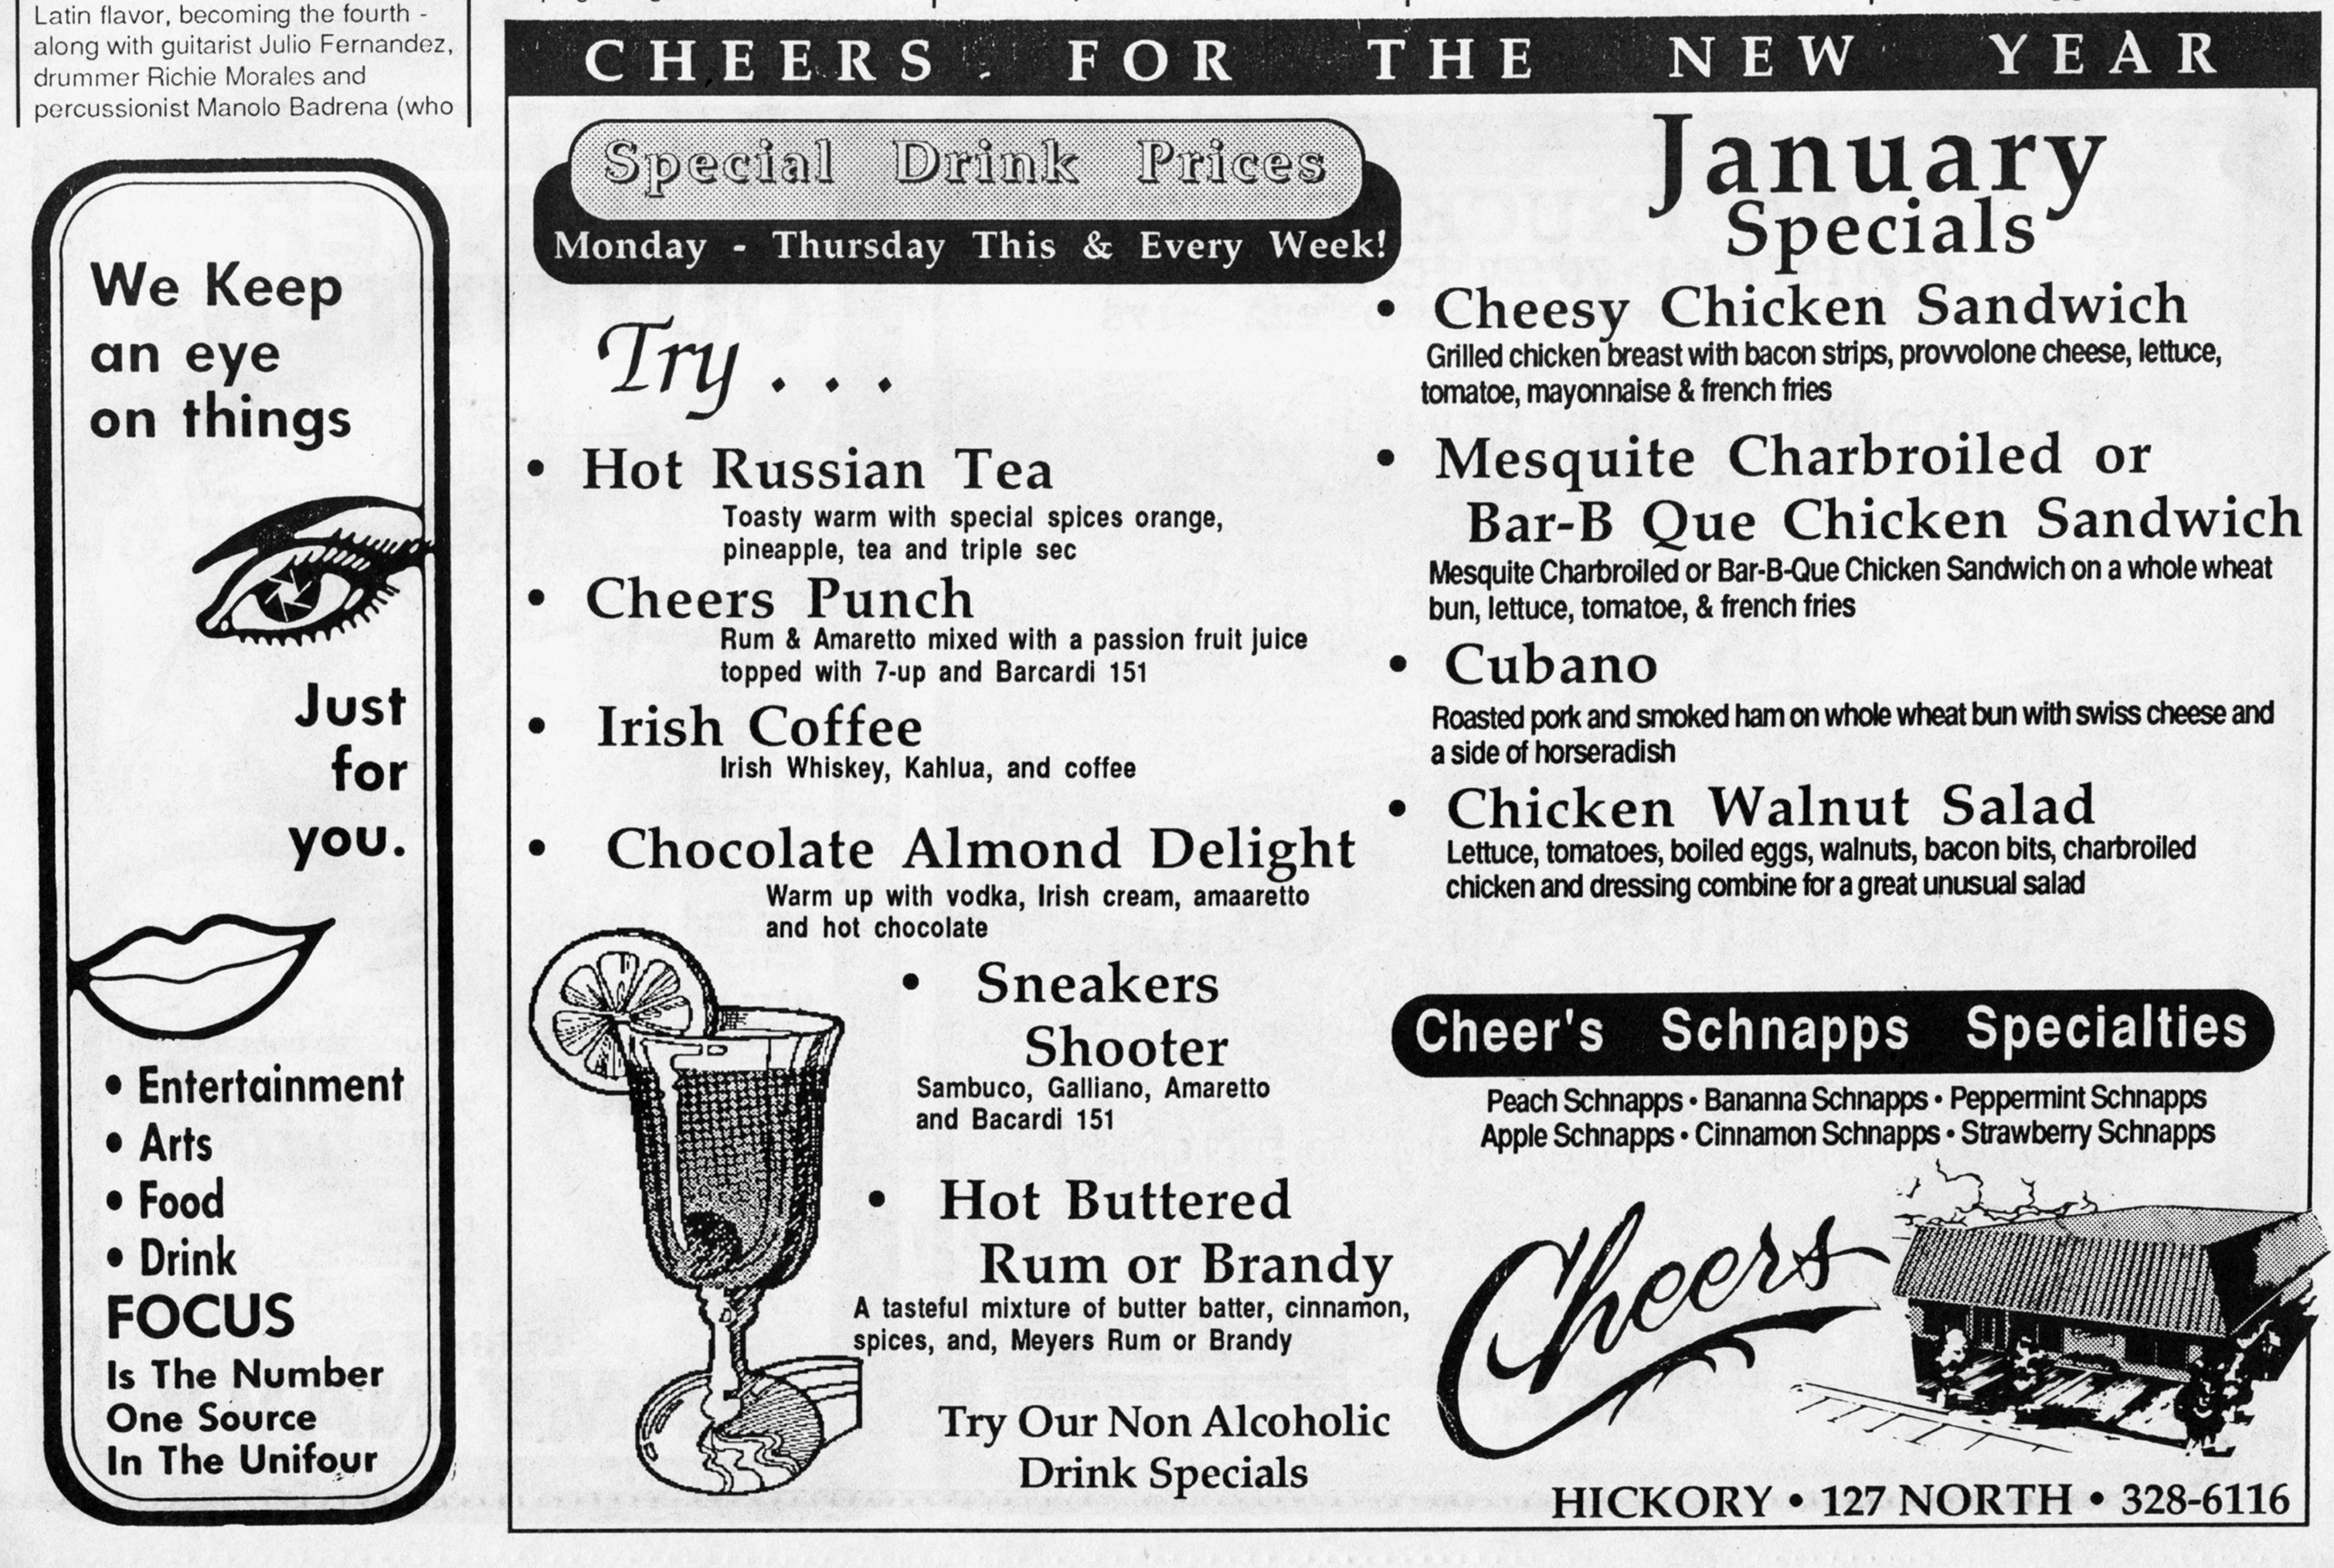 Advertisement for Cheers published January 7, 1988.